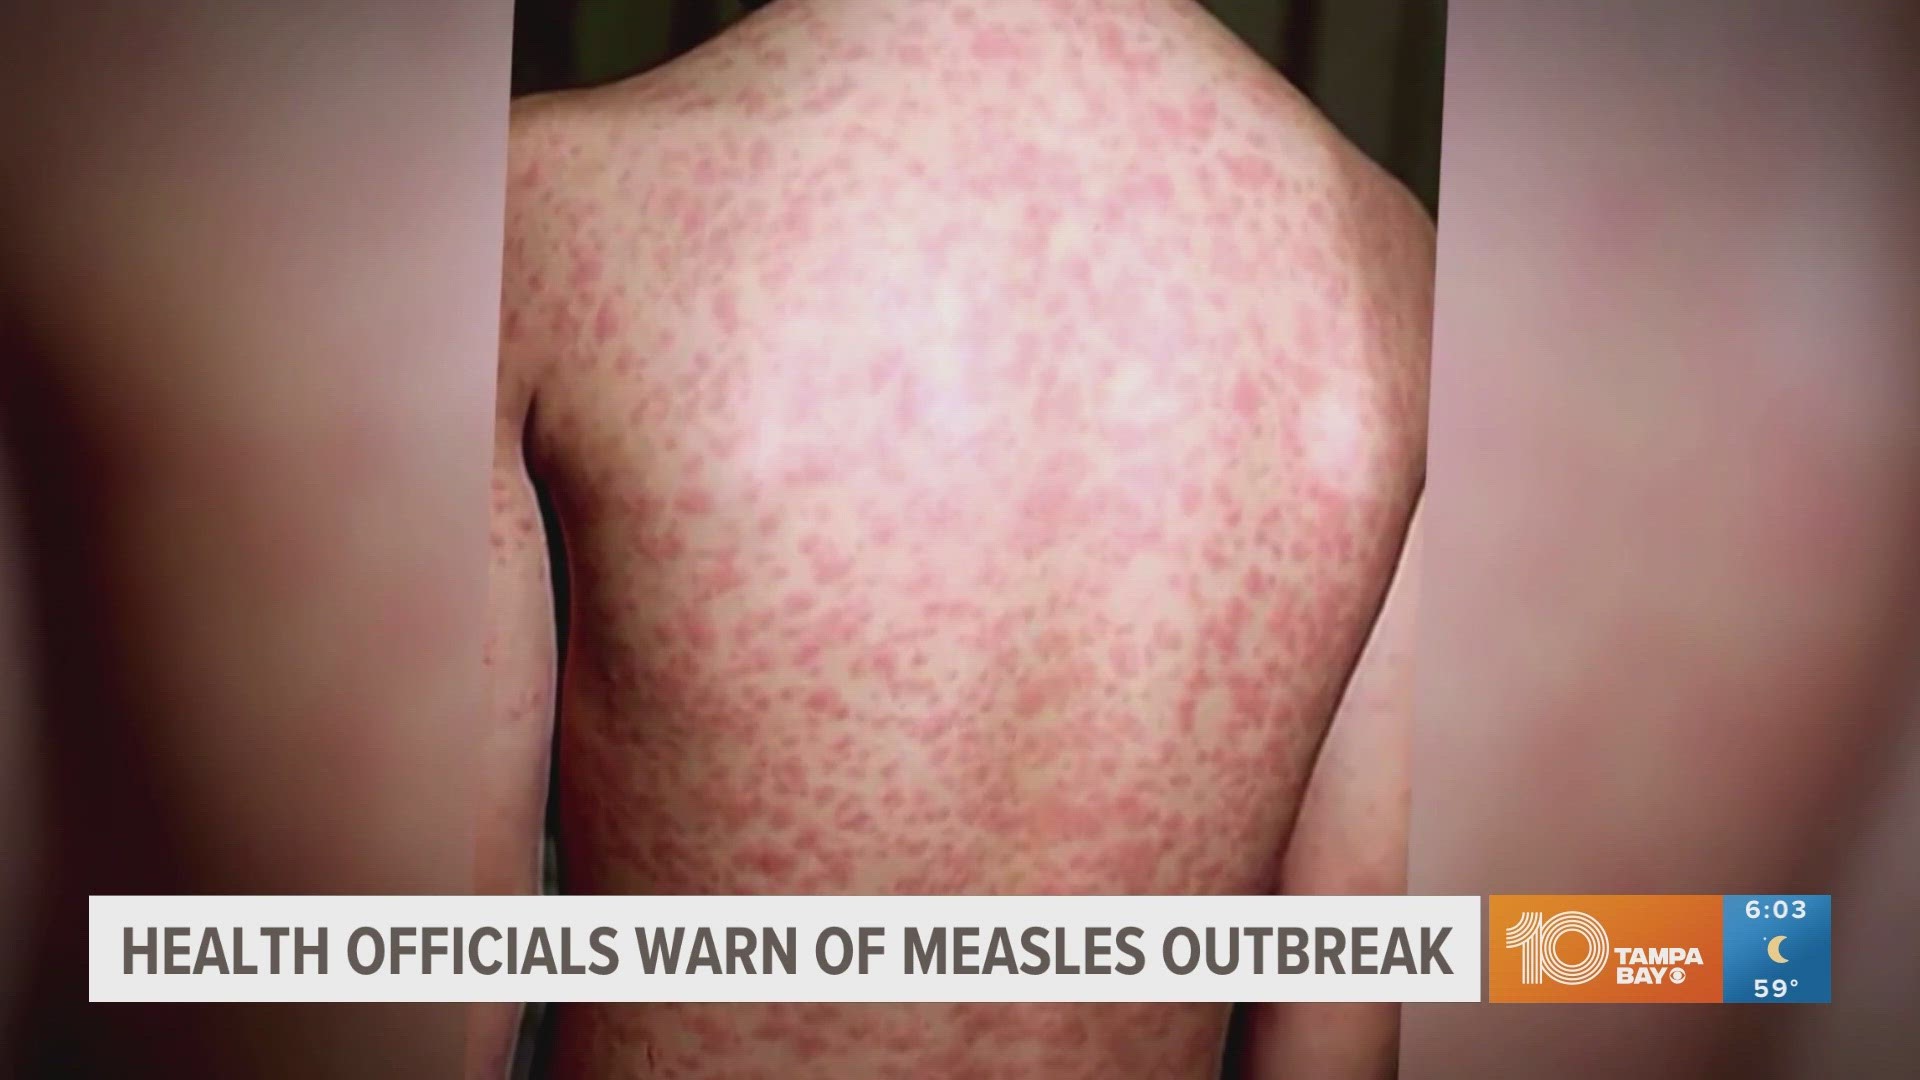 While measles is a highly contagious disease, it is preventable through vaccination.